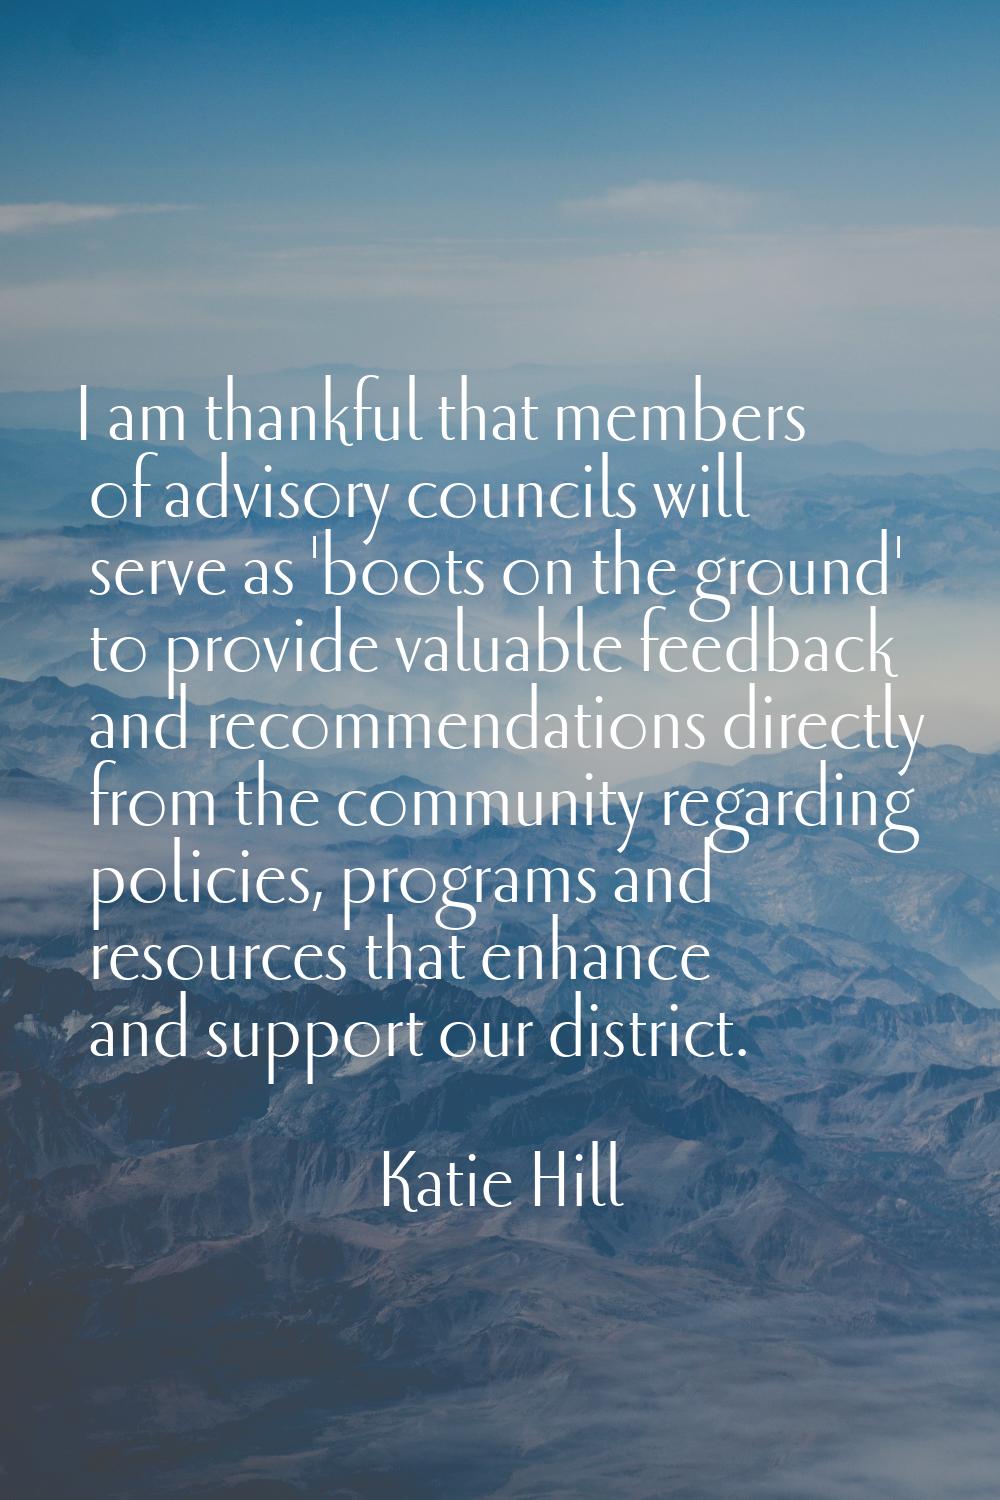 I am thankful that members of advisory councils will serve as 'boots on the ground' to provide valu